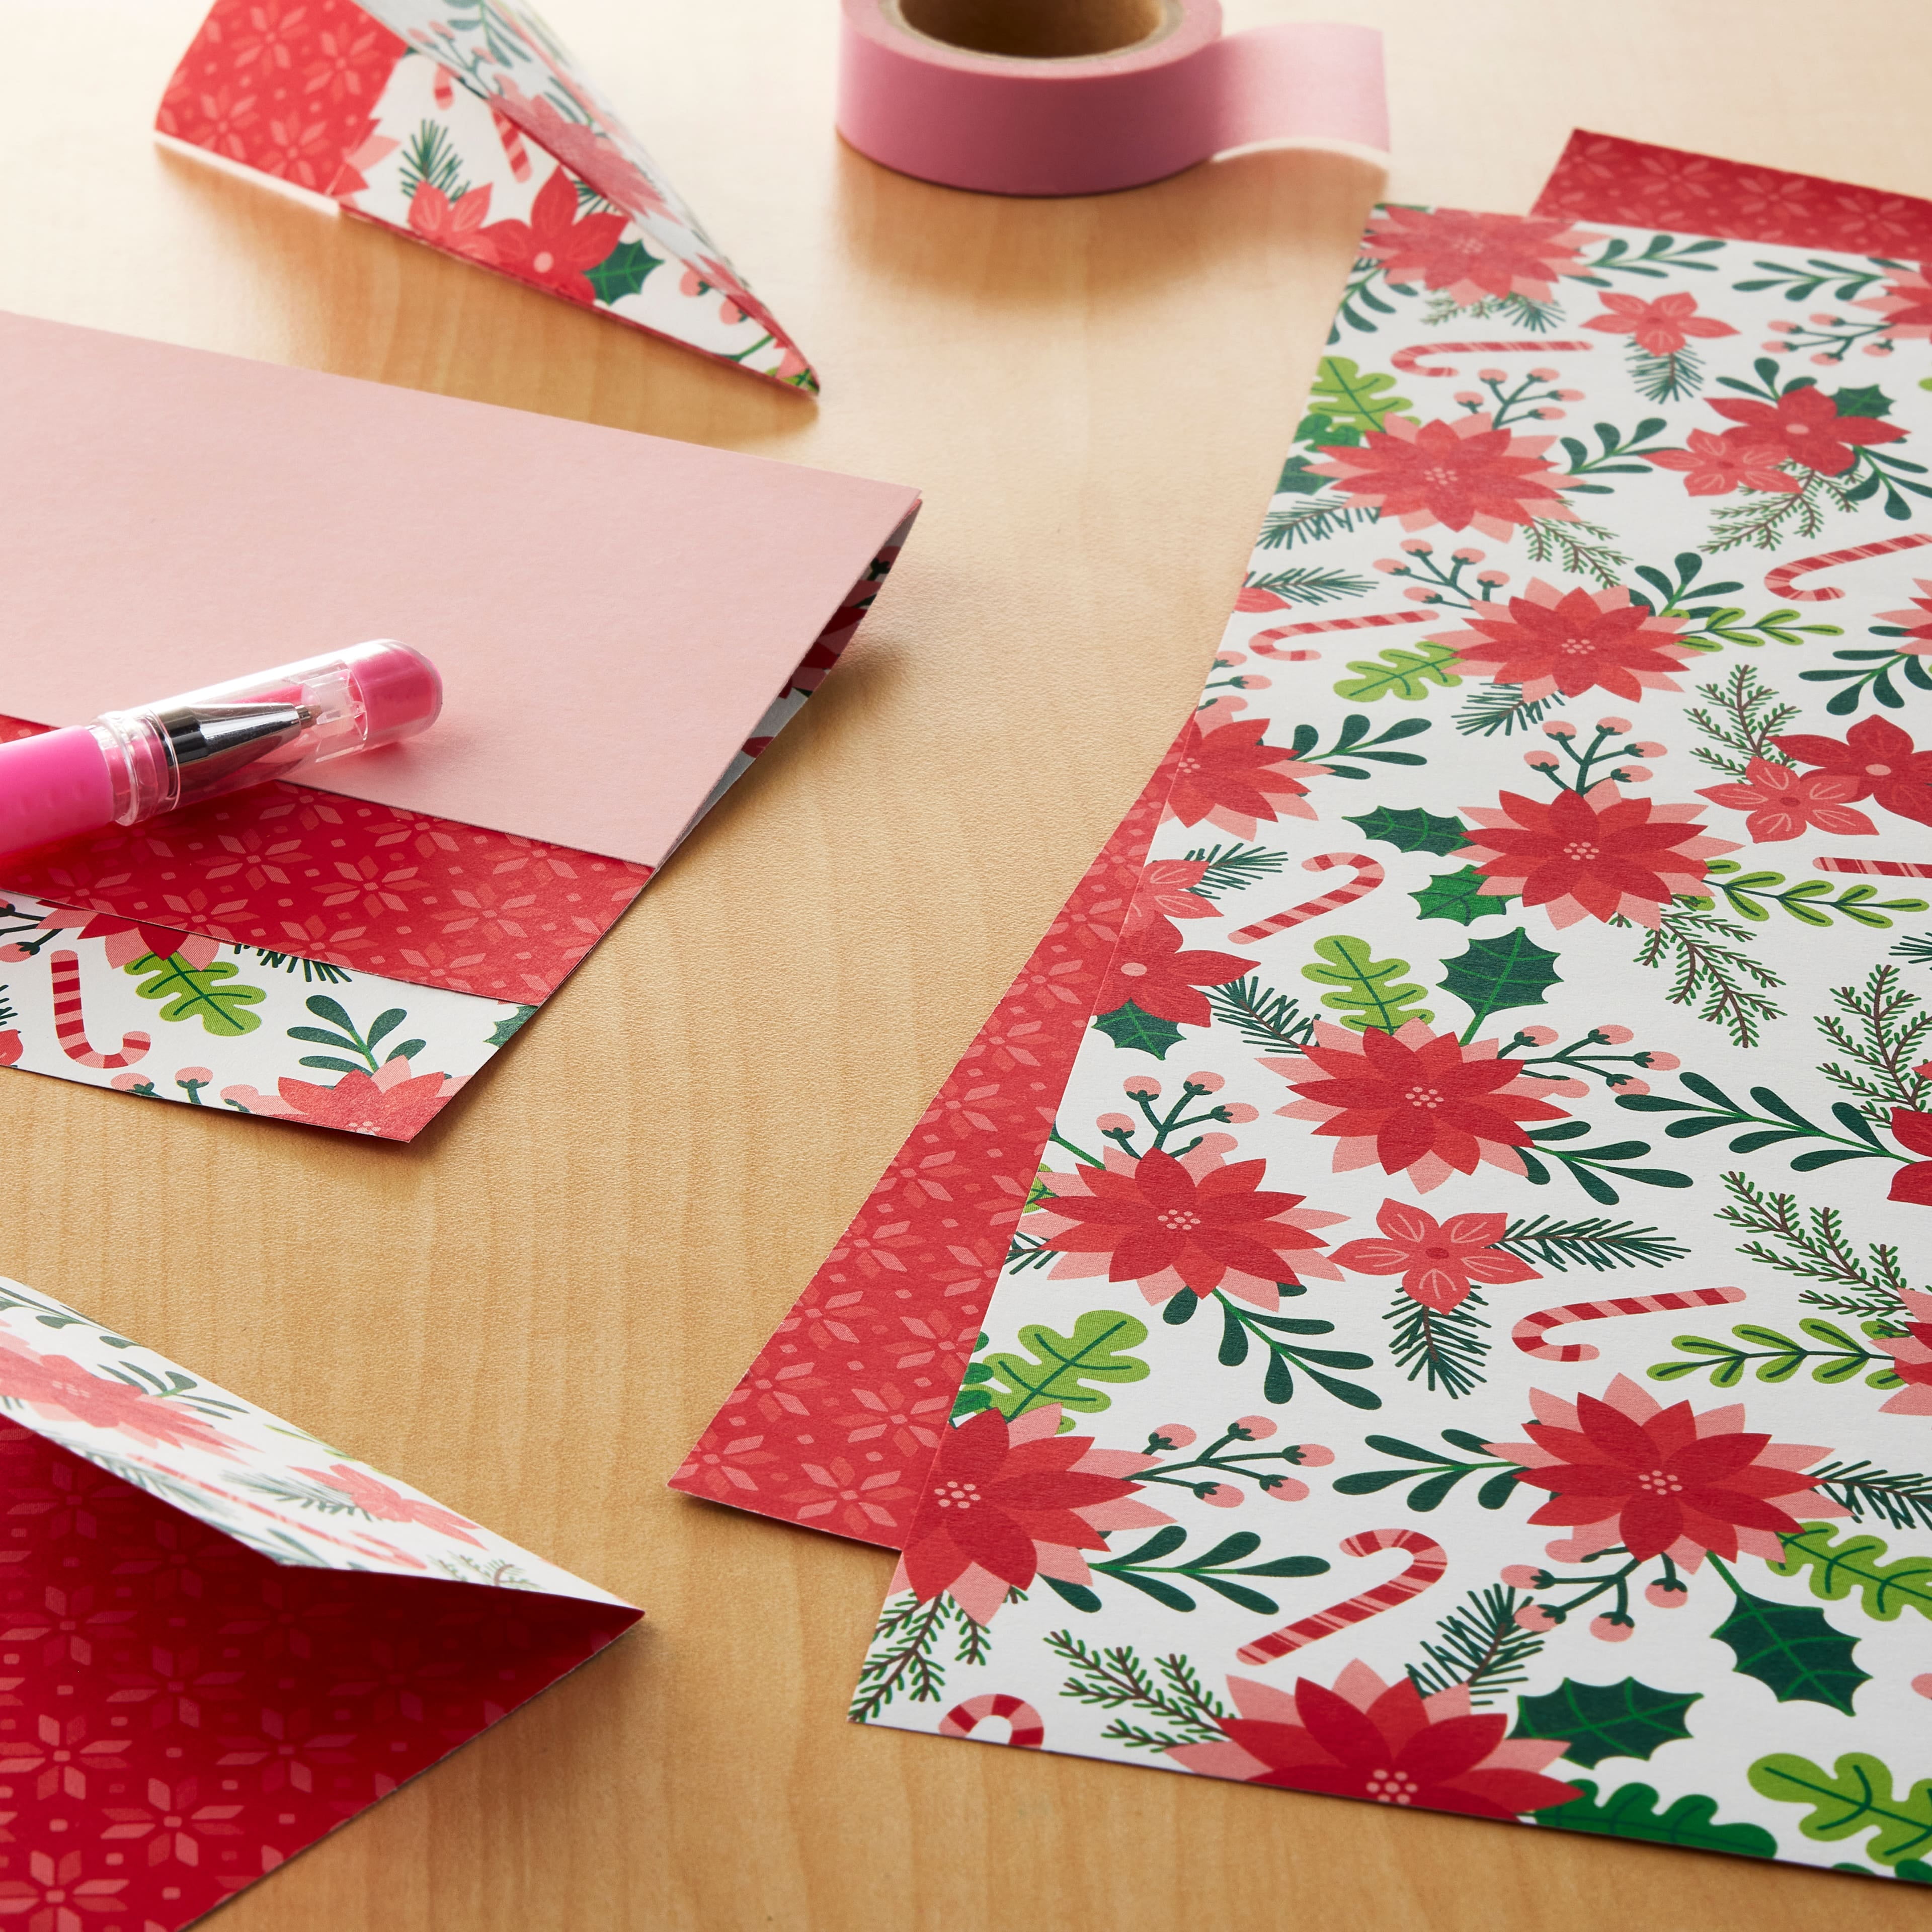 Cozy Christmas Double-Sided Cardstock Paper by Recollections™, 12